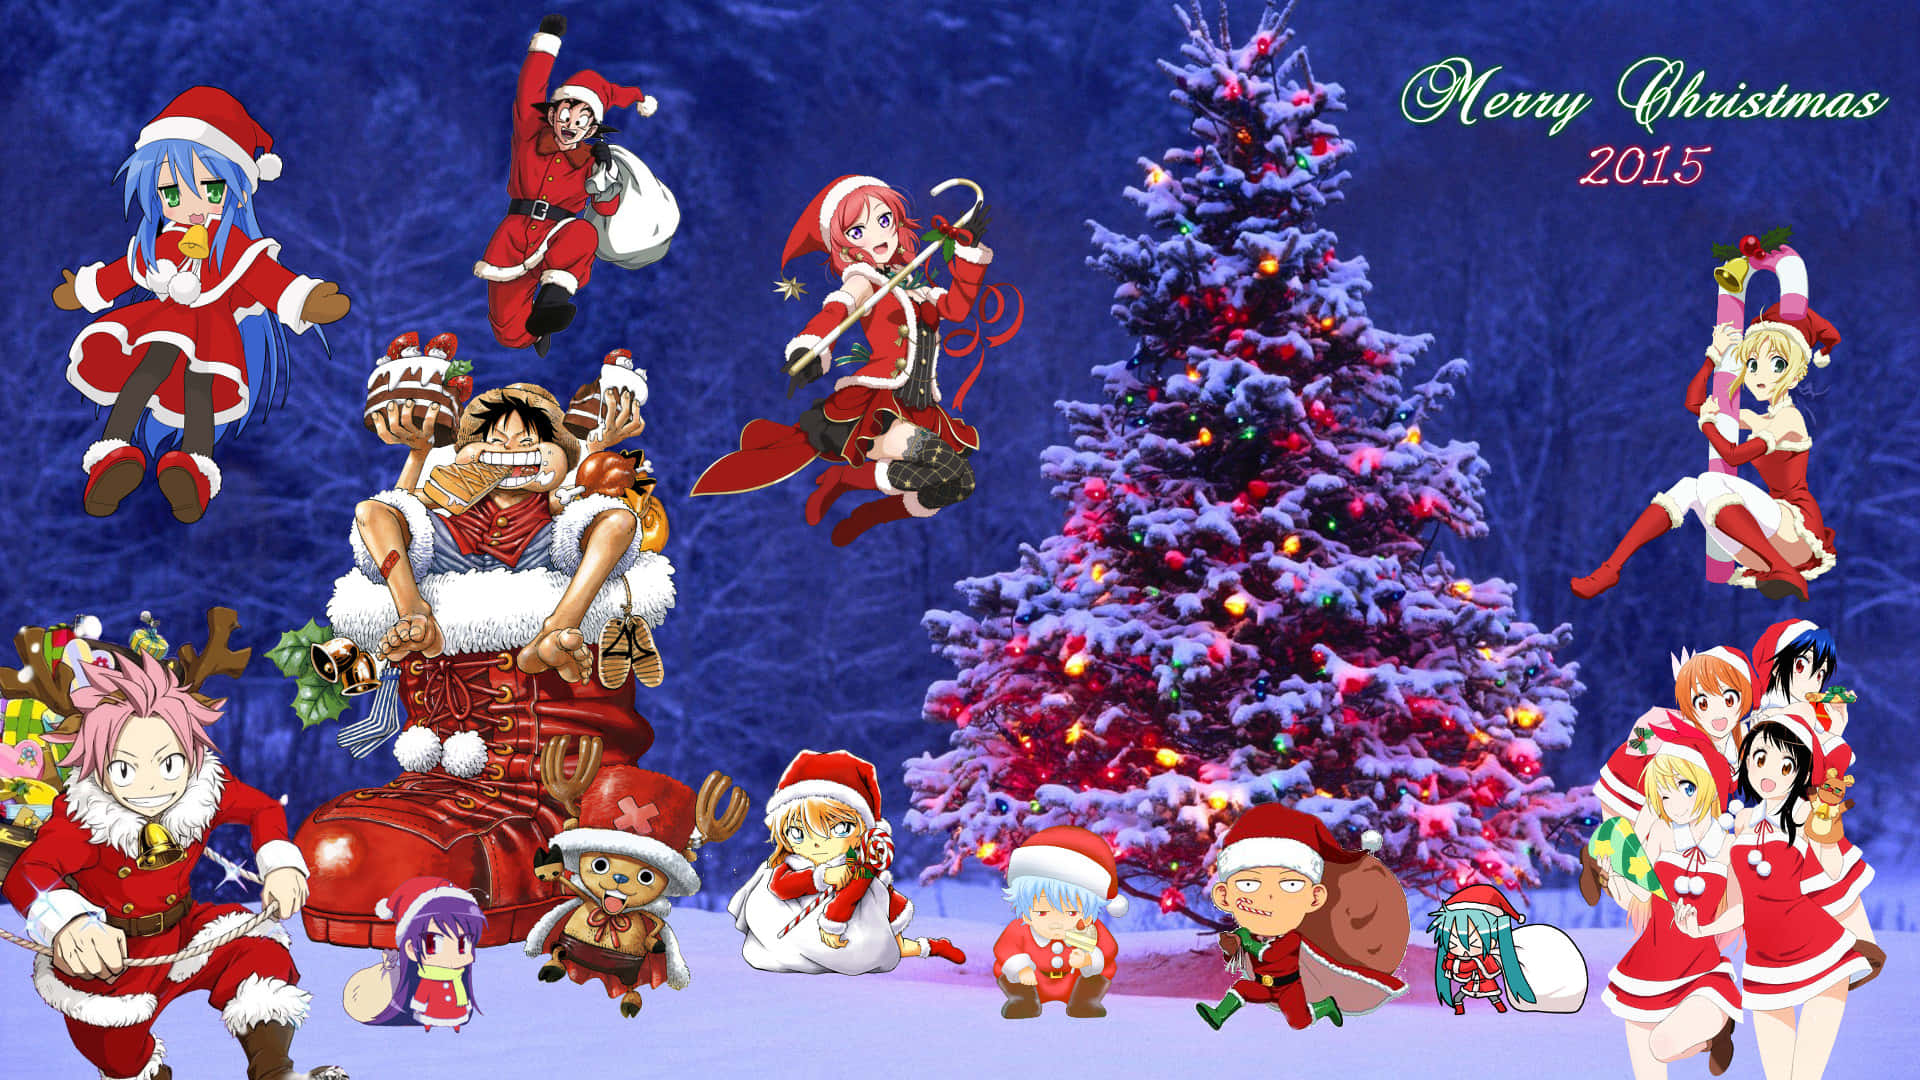 Share the Christmas spirit with these cute Anime characters!